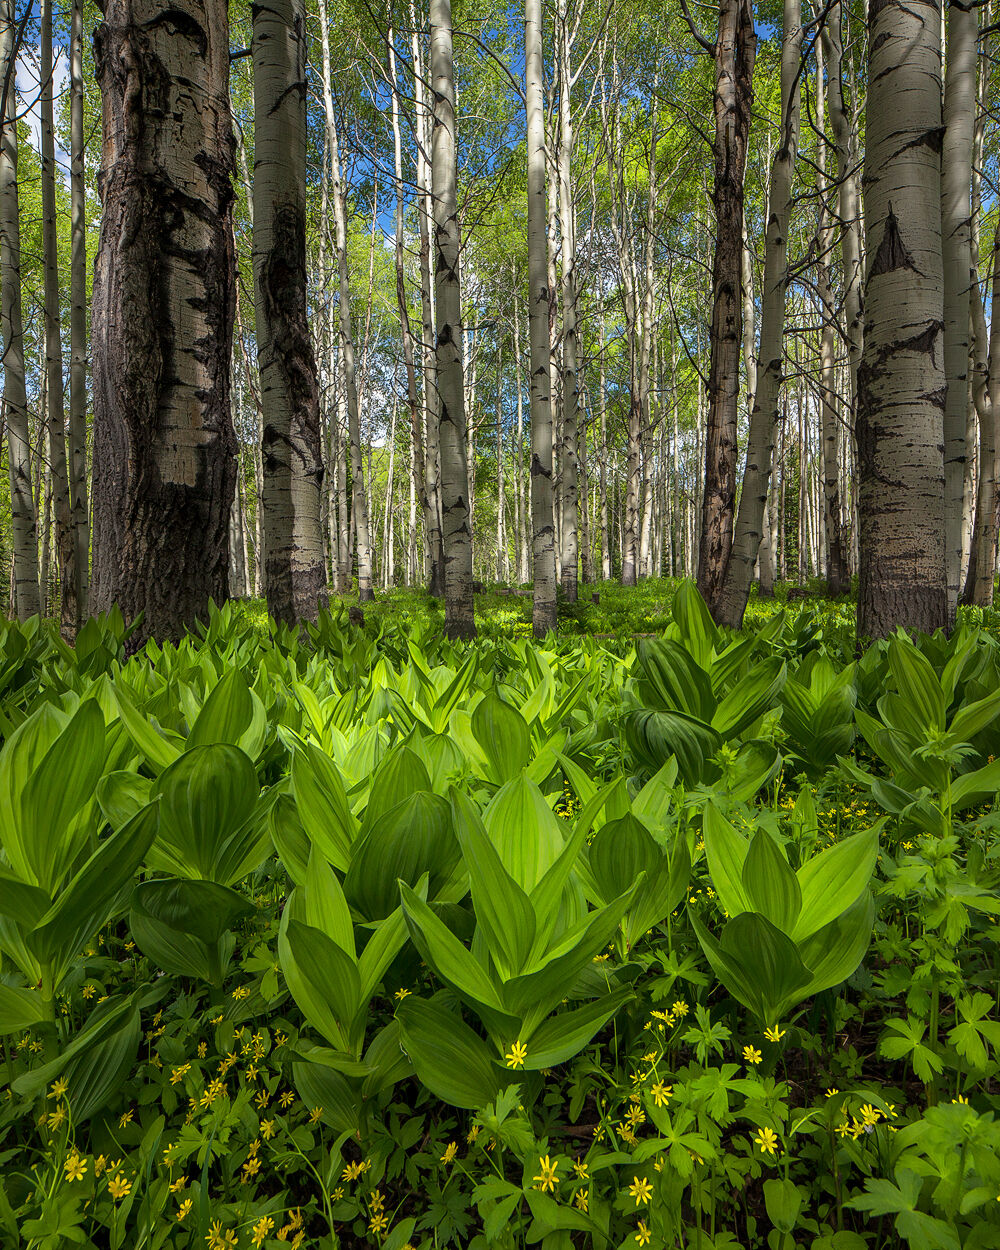 Green flowerless plants cover the aspen forest floor that shows the white tree trunks and tops of the trees having green leaves in the distance. 